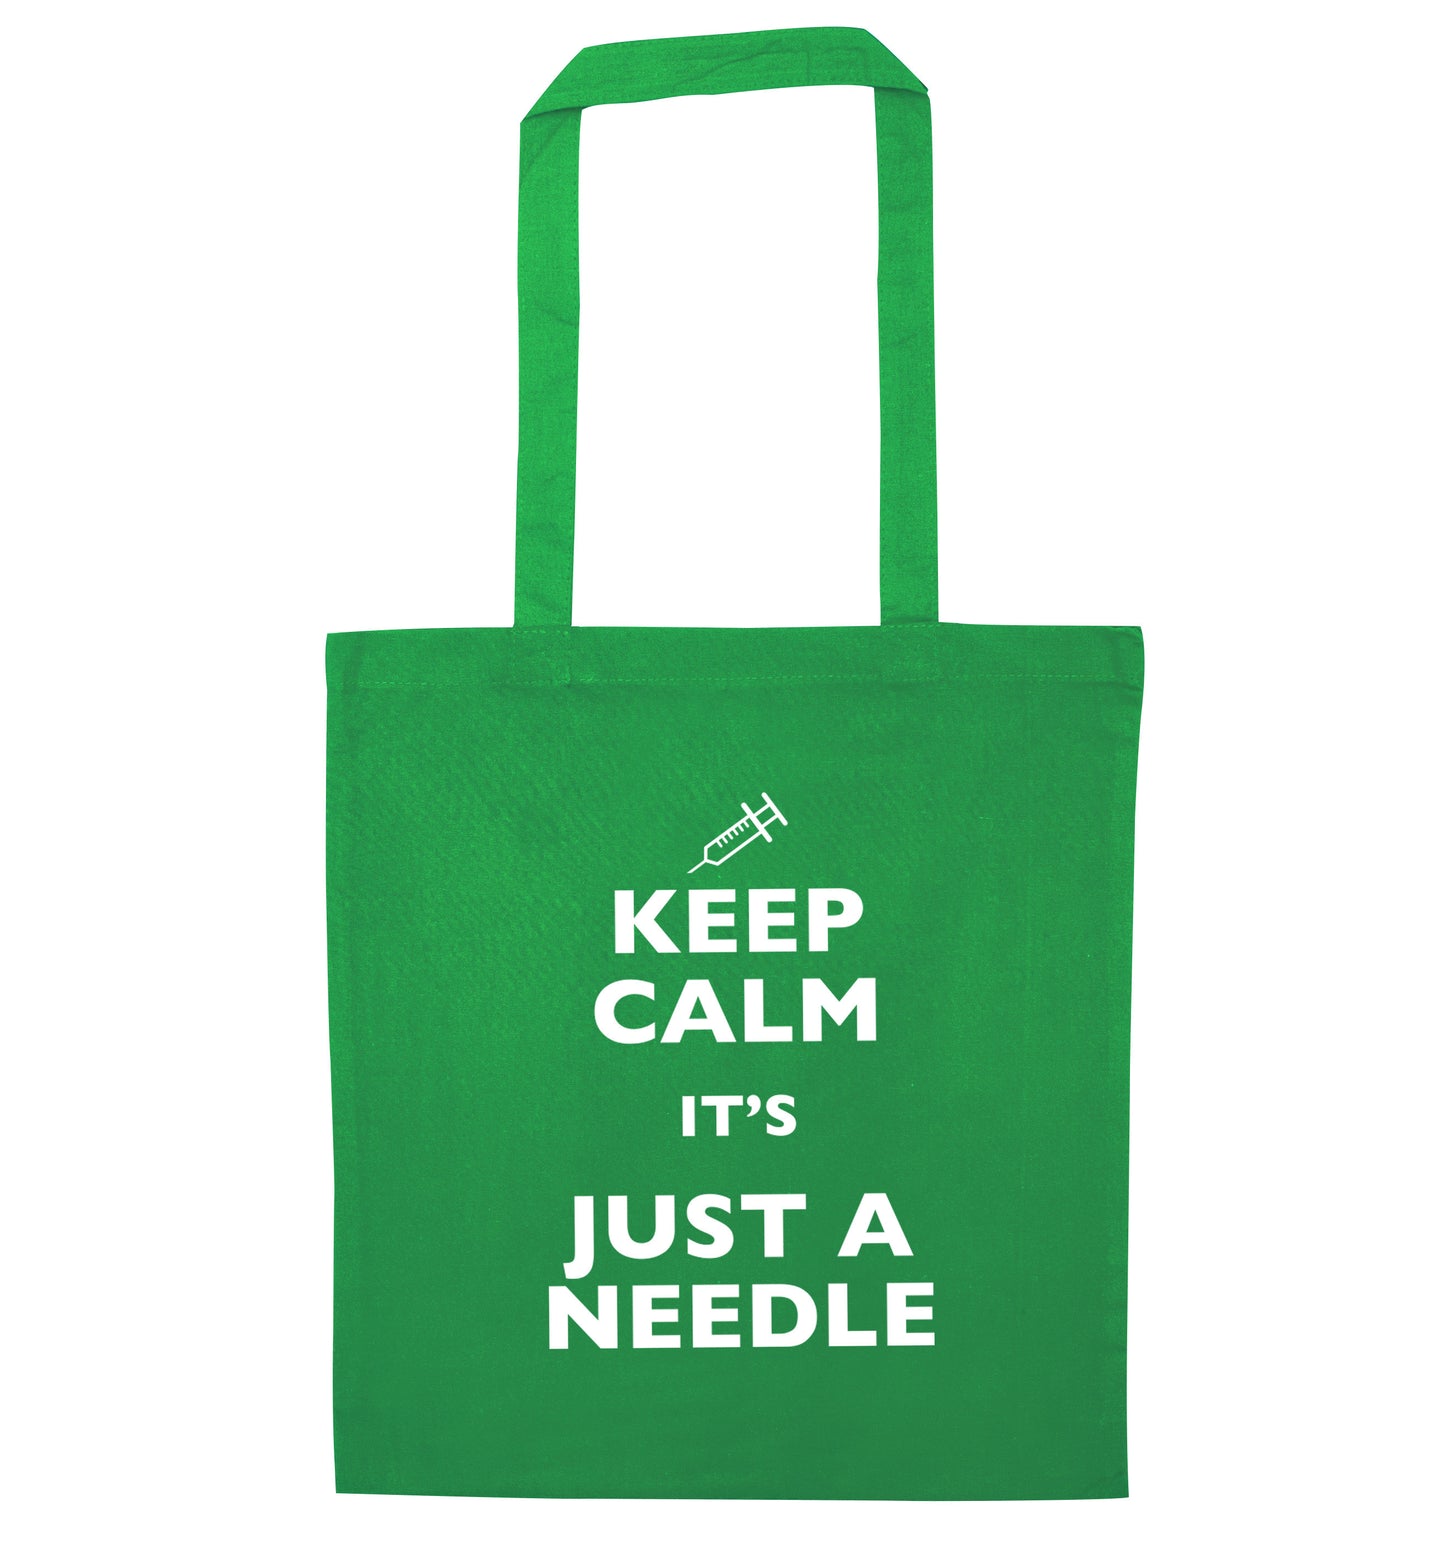 Keep calm it's only a needle green tote bag